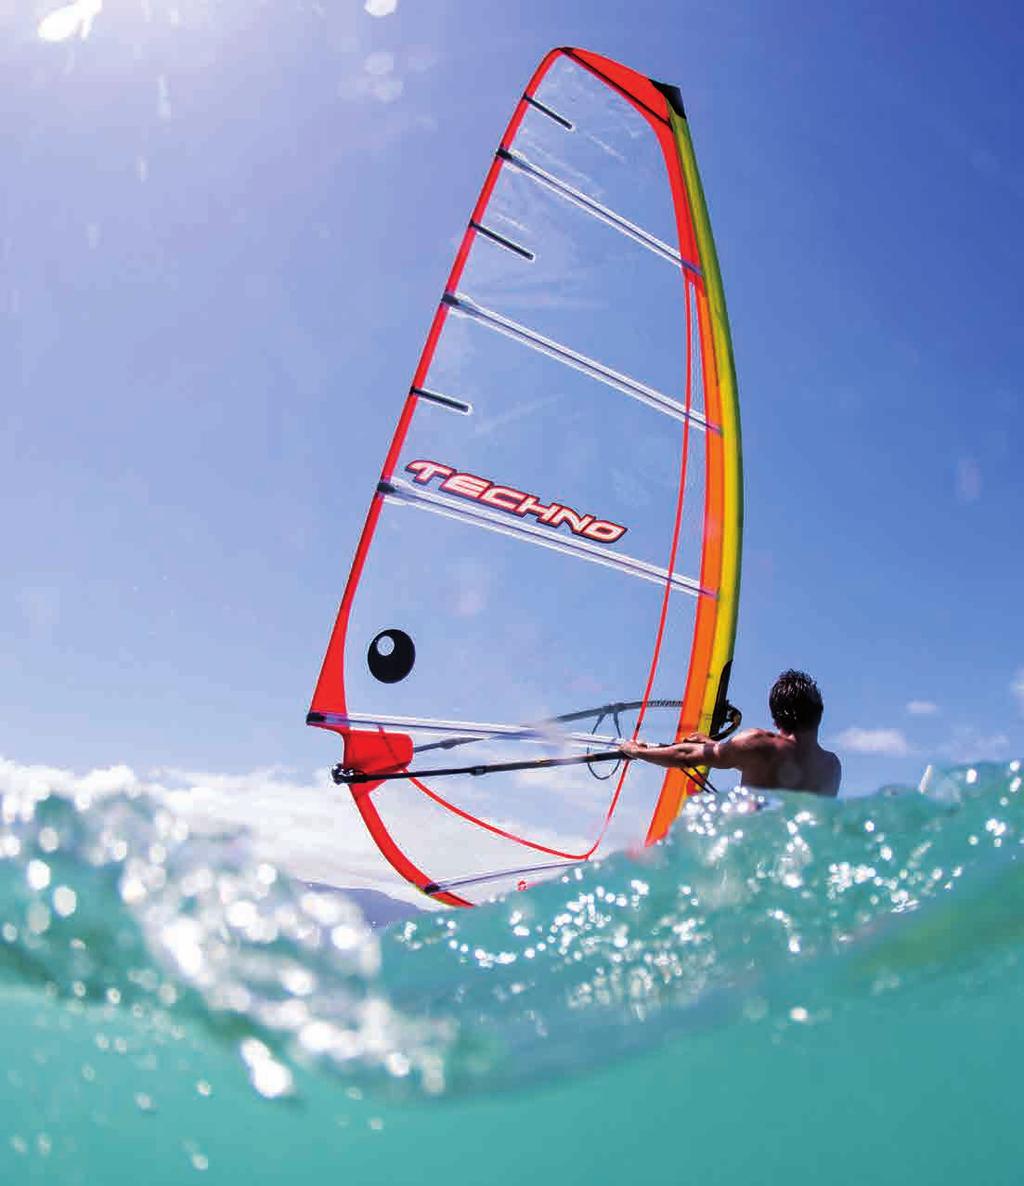 BIC WINDSURF RIGS The 1 BIC Sport Techno and va rigs have been seriously